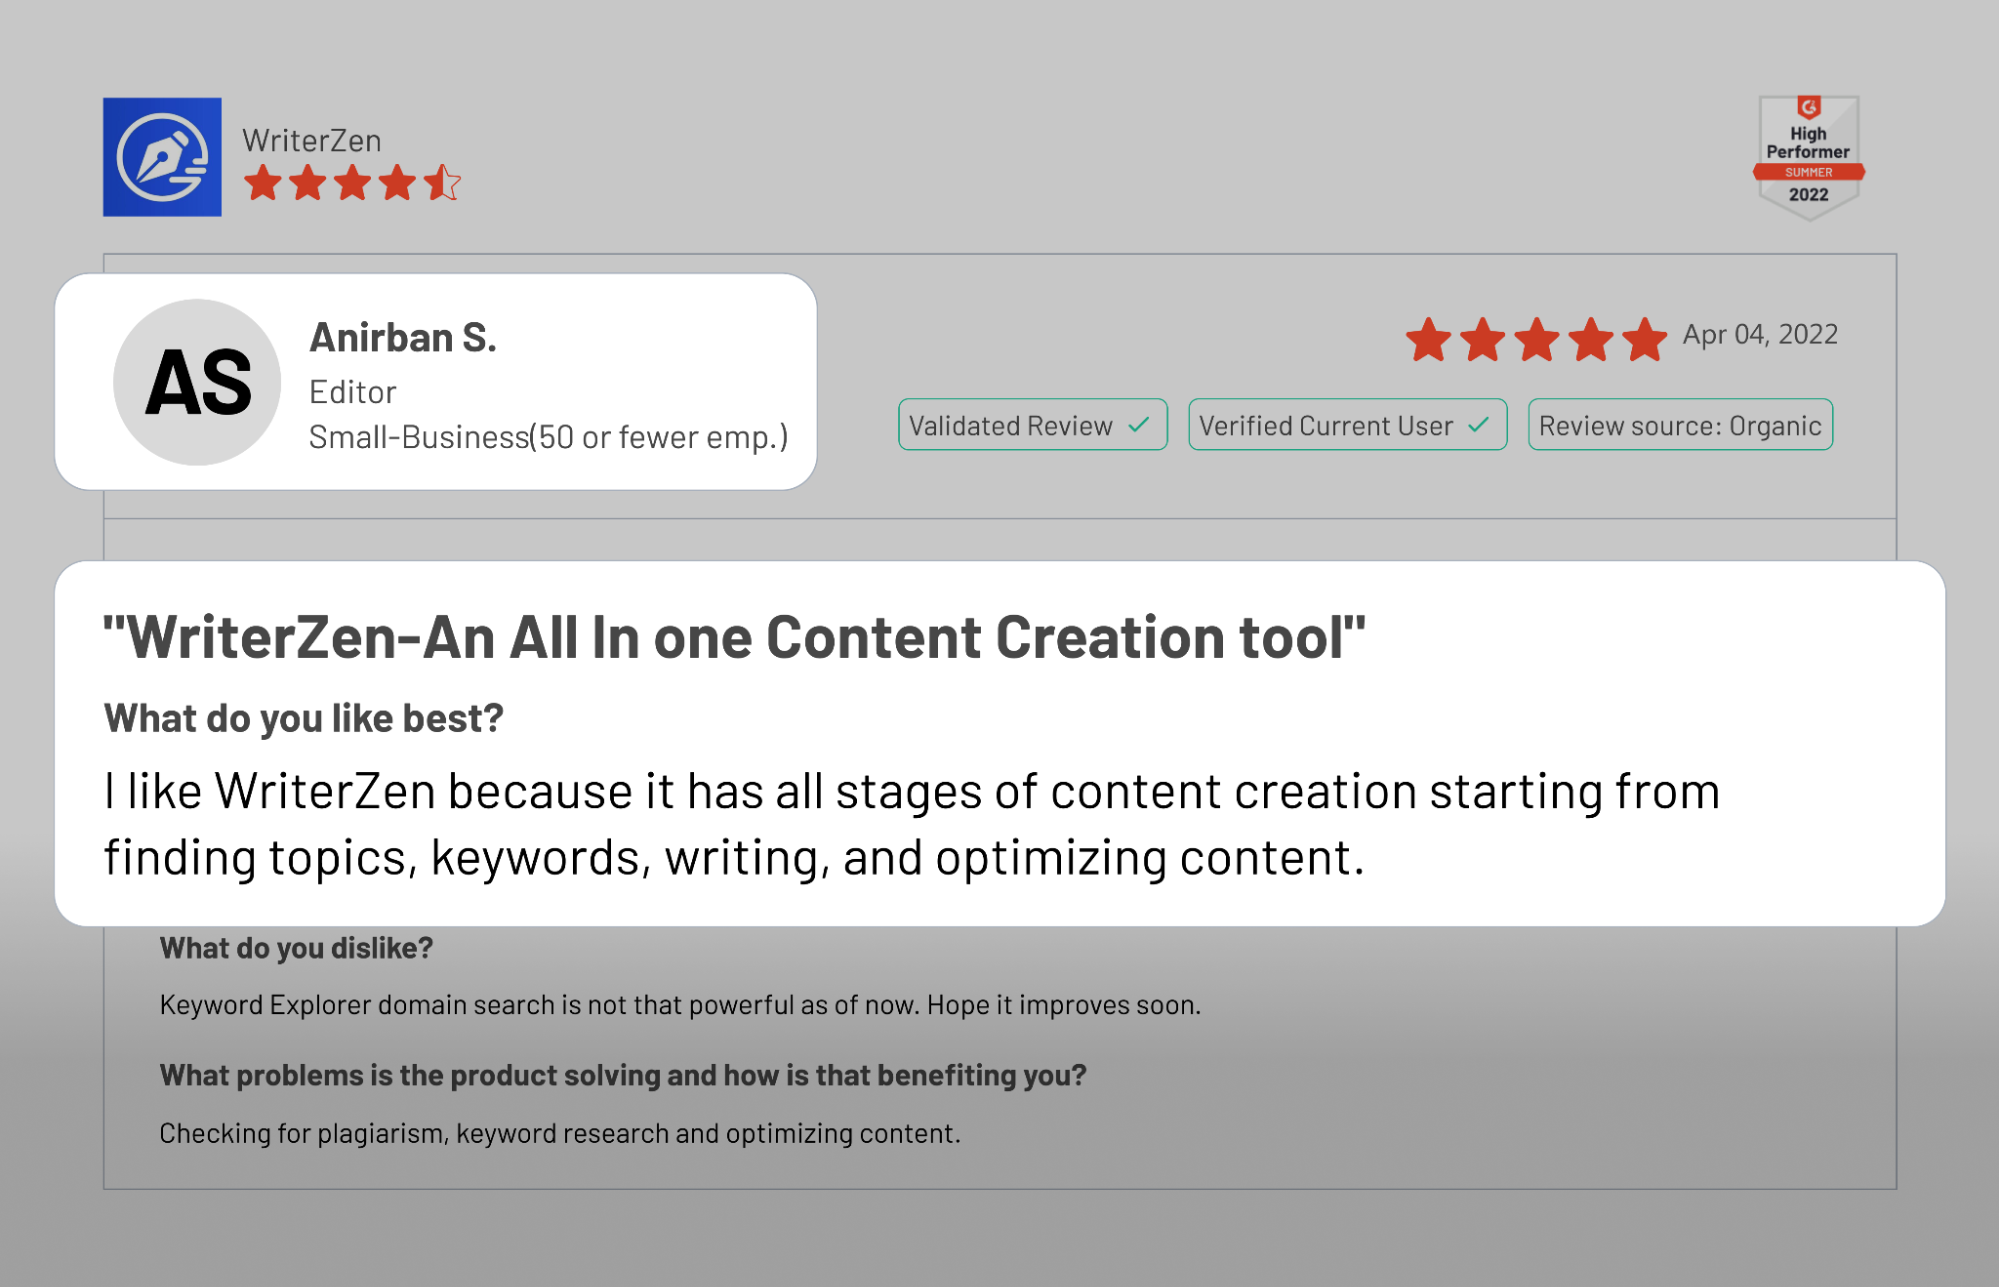 WriterZen Is Reviewed as All-in-one Content Creation Tool